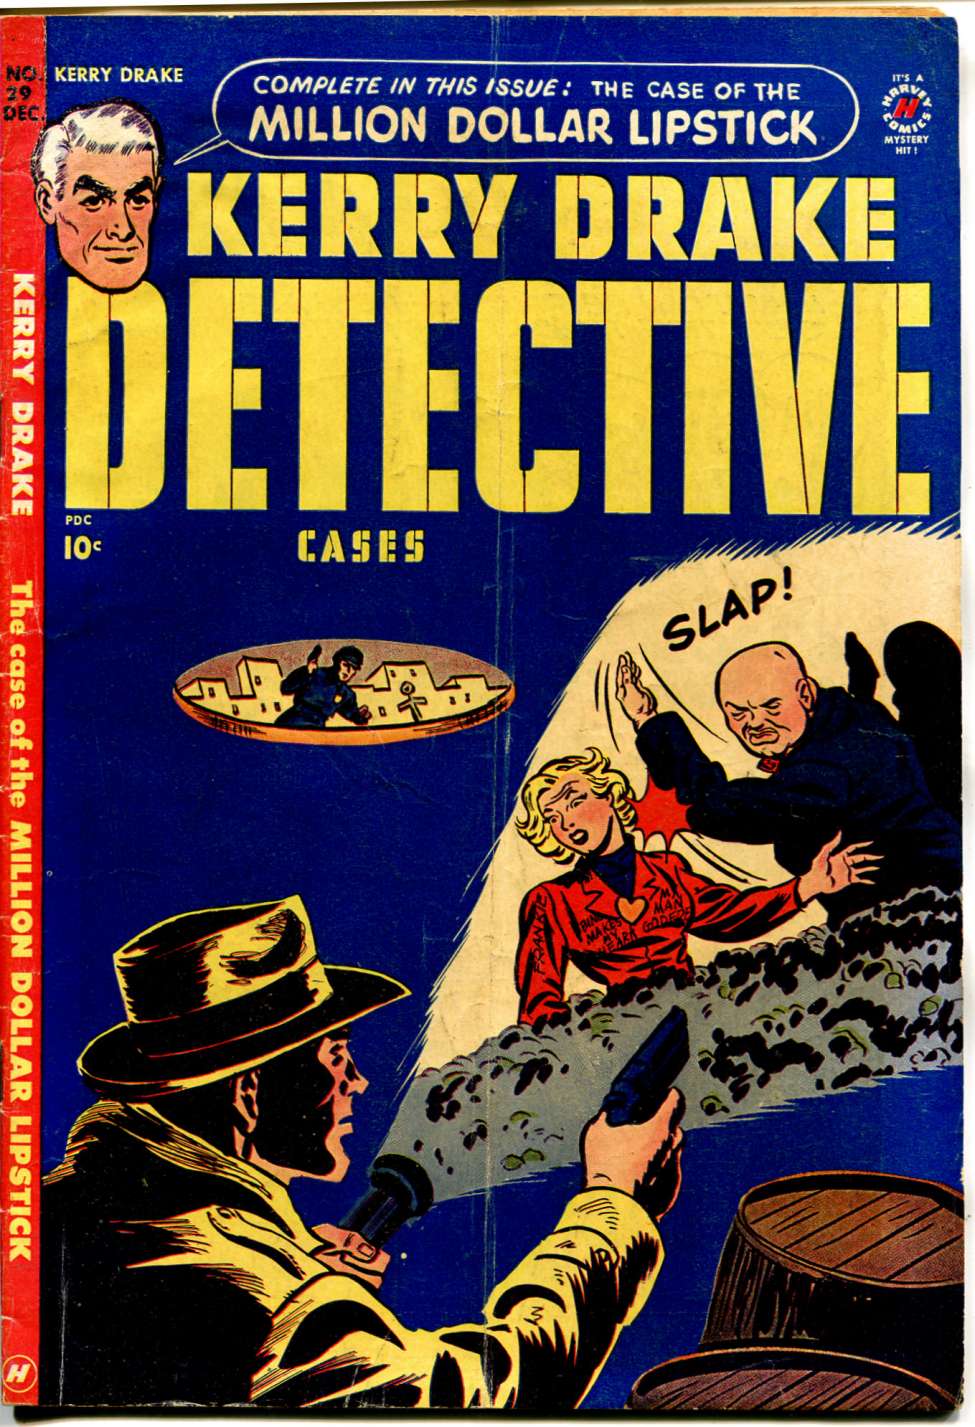 Book Cover For Kerry Drake Detective Cases 29